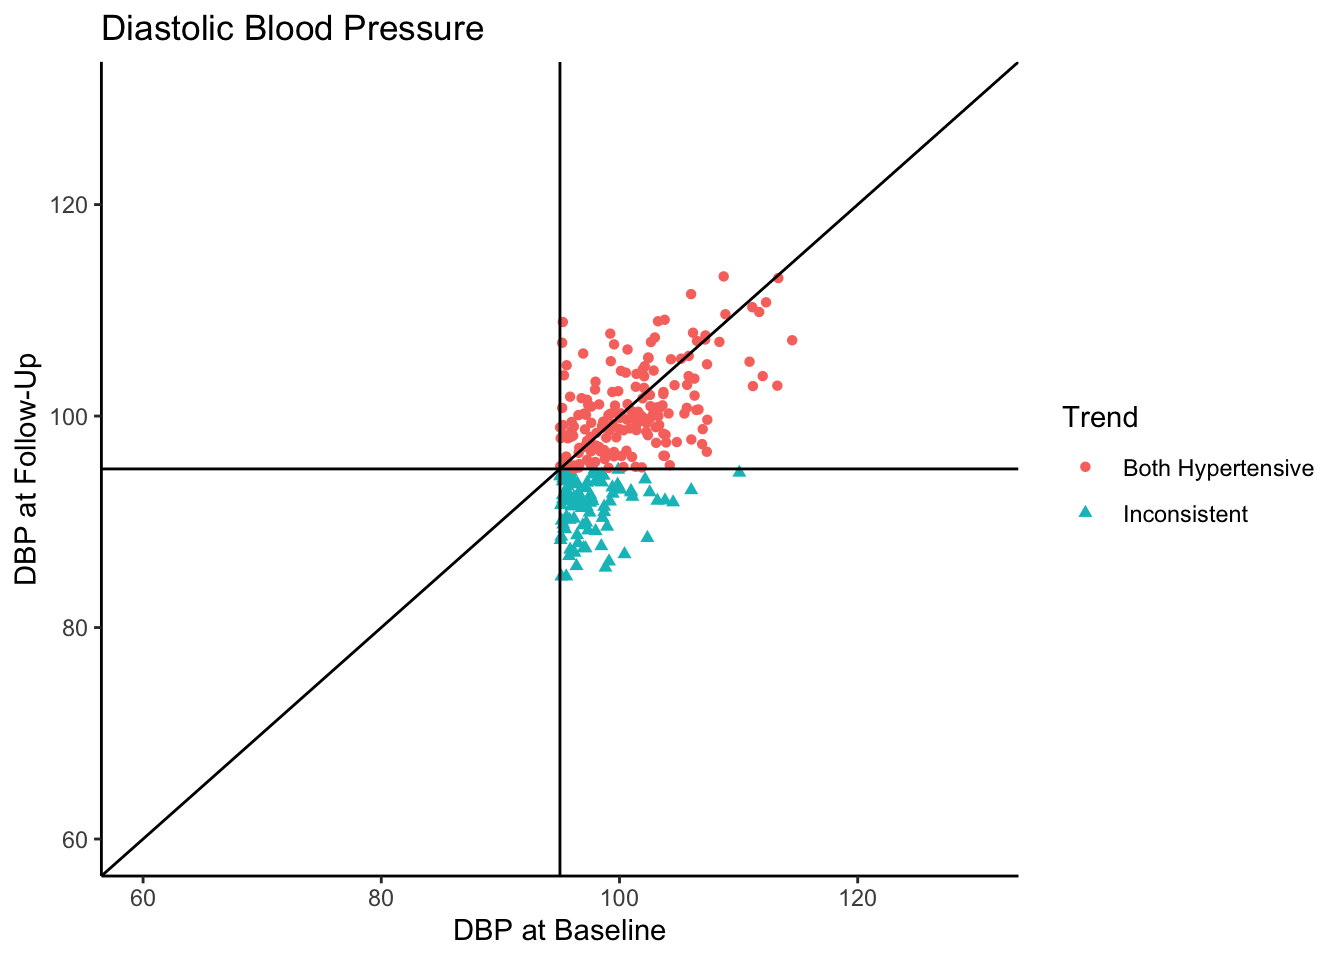 Same color coded scatterplot as above between Baseline and Follow-Up scores along with mean and slope lines, however only those individuals who were hypertensive at baseline are included. Since DBP at Baseline is on the x-axis, and a vertical line indicates the mean of DBP at Baseline, there are no datapoints to the left of this line.